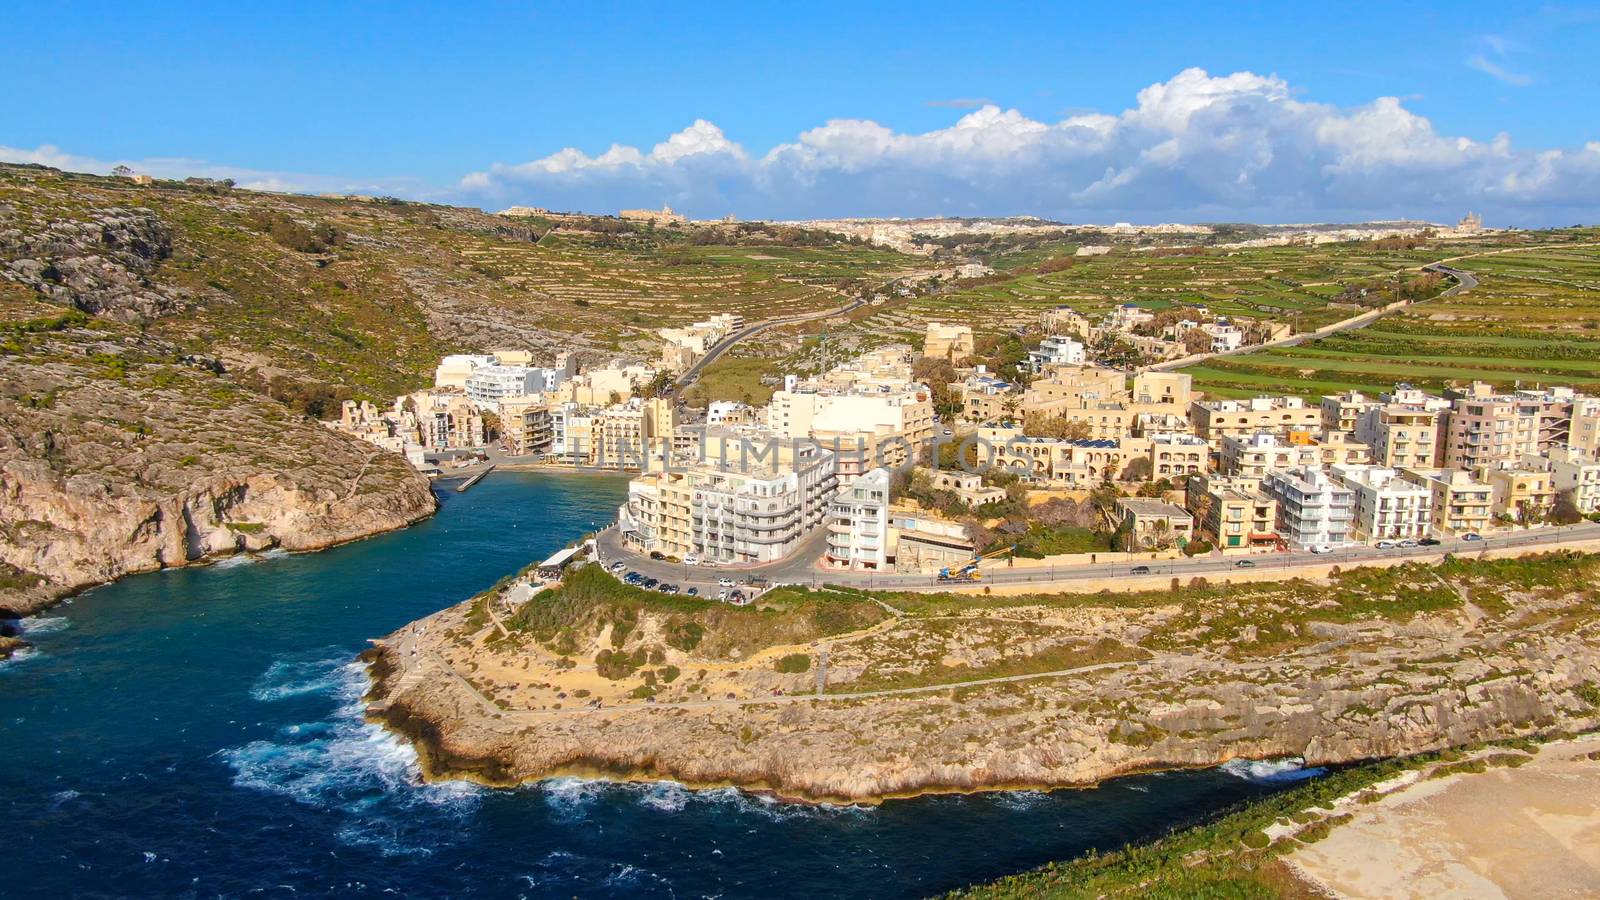 The village of Xlendi on the Island of Gozo from above - a popular place by Lattwein